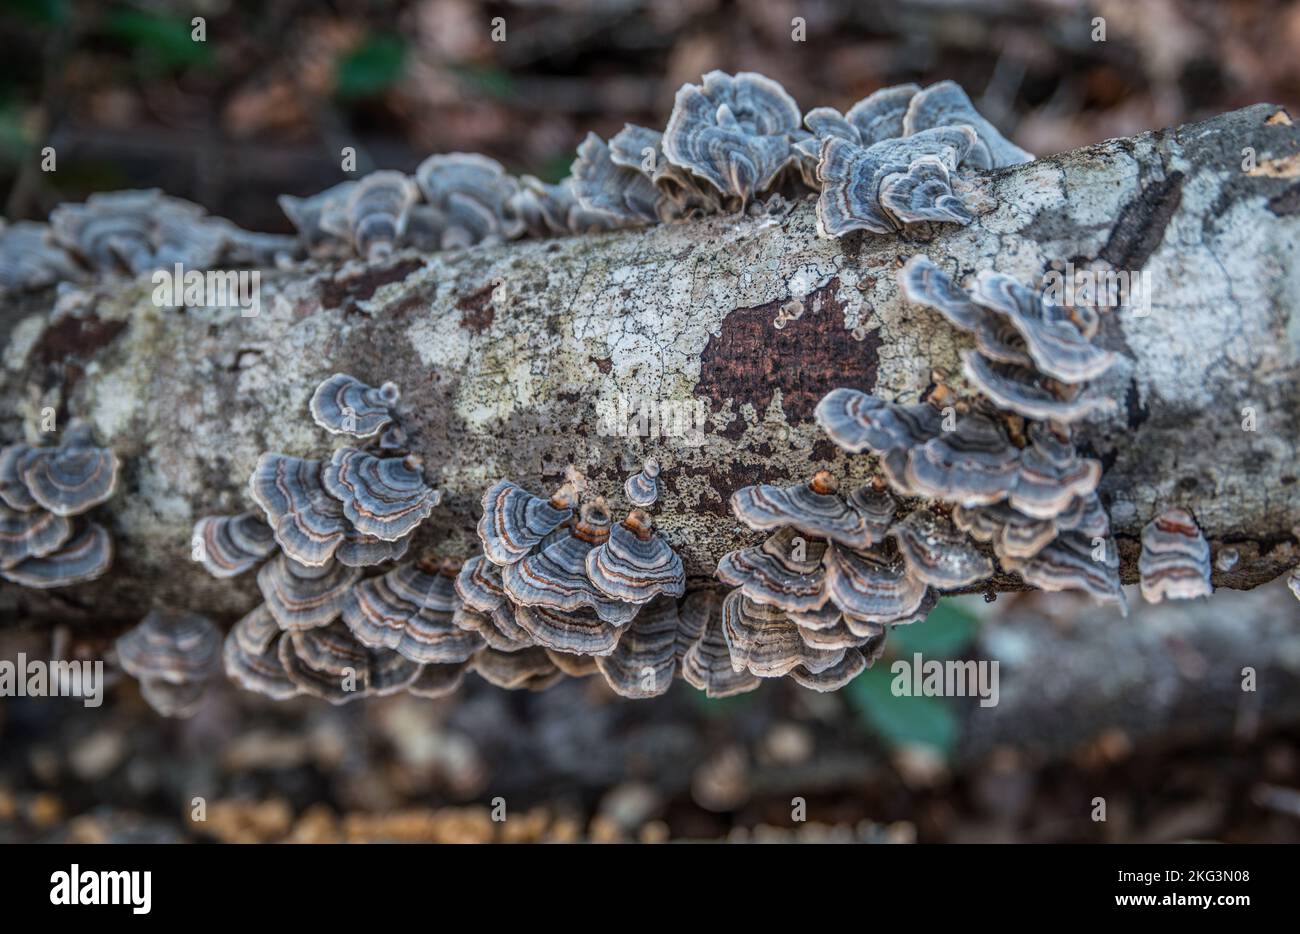 Colorful mushroom growth on a fallen tree limb common name turkey tail fungus in a forest closeup view Stock Photo